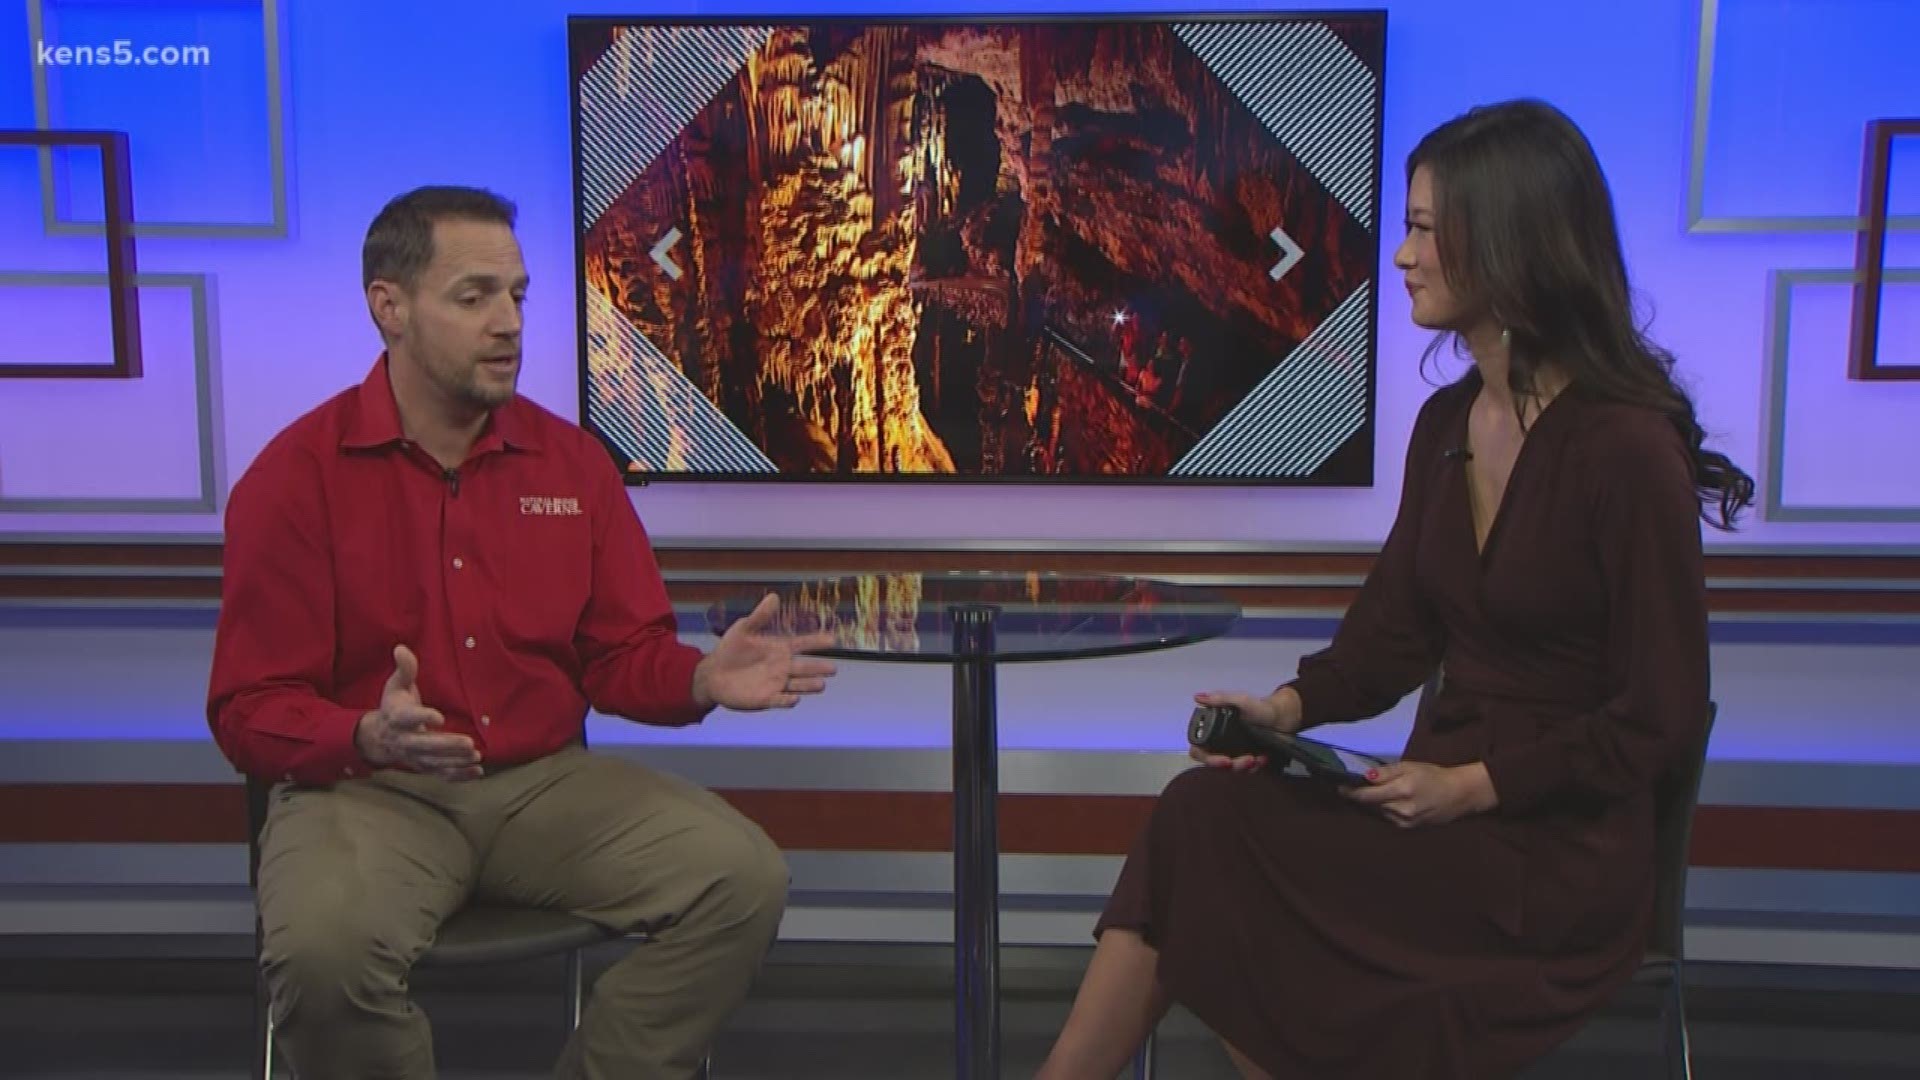 Looking for Spring Break activities? Today, we highlight a destination that is both fun and educational. Travis Wuest from Natural Bridge Caverns stops by to talk about the local attraction.